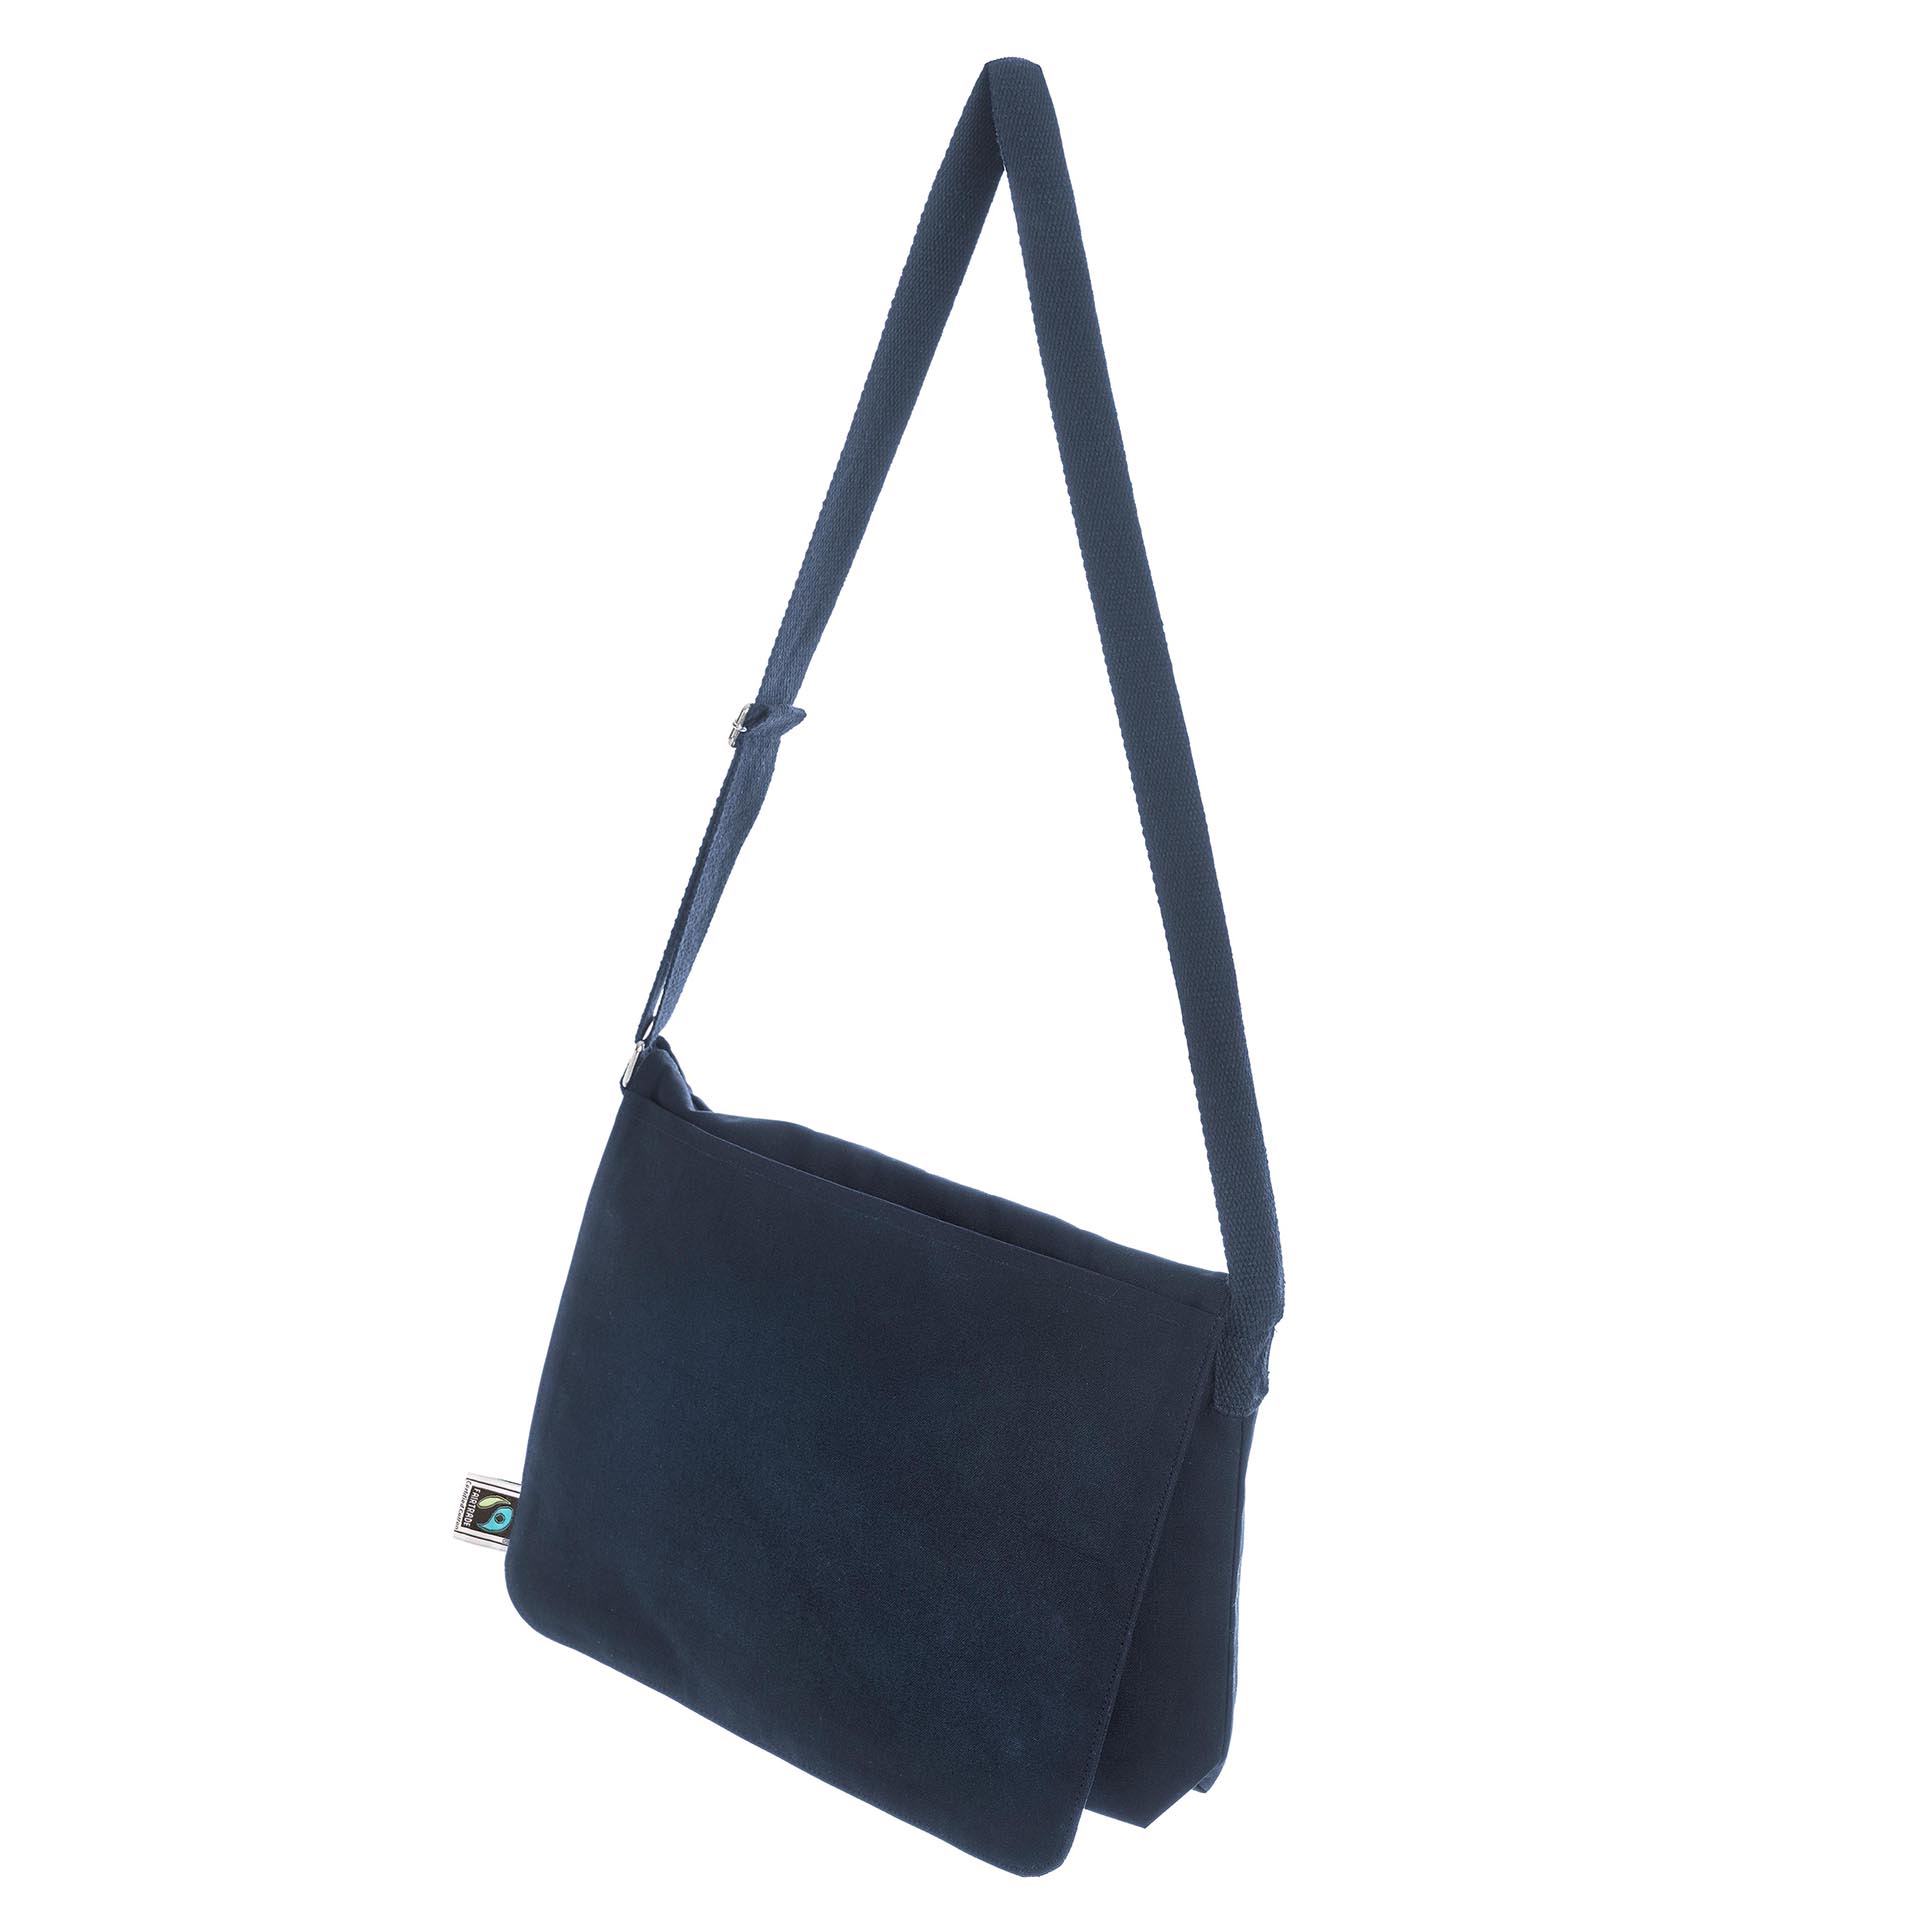 The Green & Good Canterbury Messenger Bag is made from Fairtrade & Organic cotton. It comes in navy or black and has been dyed with AZO-free dyes which are considerably better for the environment. Practical messenger bag for students and for everyday use. Pocket on the outside flap. Ethically produced in India in an audited factory. 12oz / 340gsm Fairtrade & Organic cotton. Navy